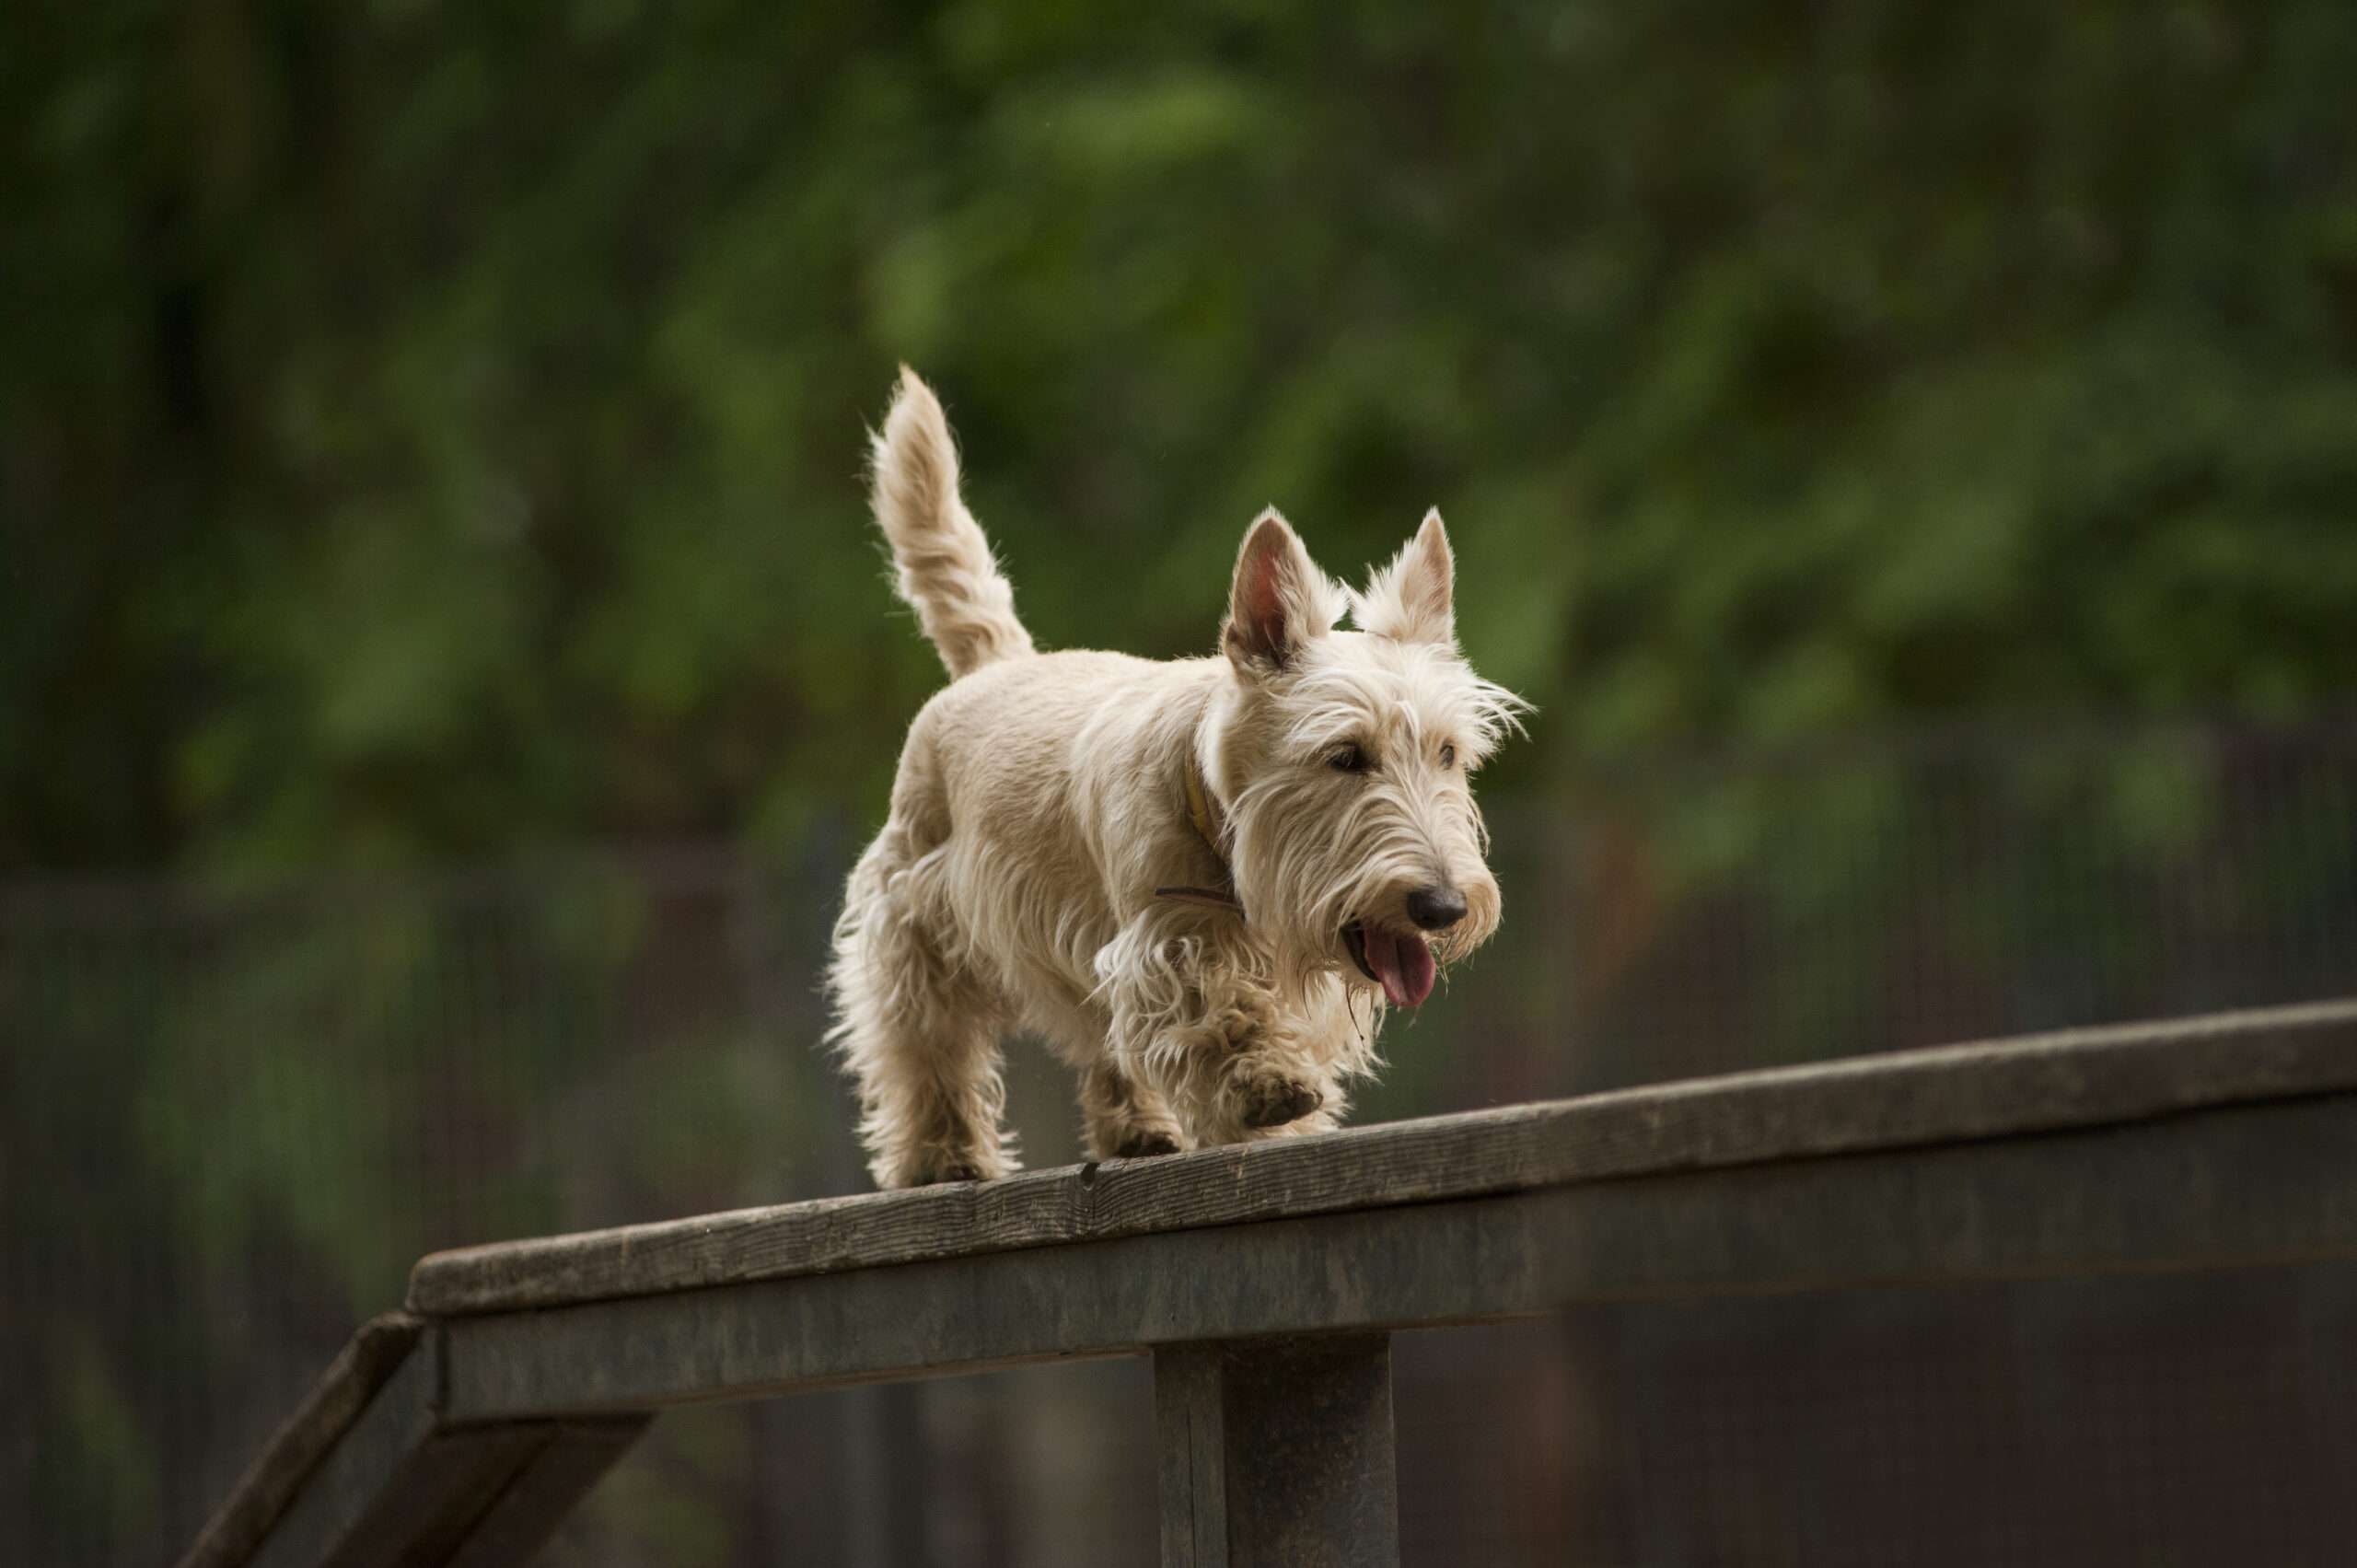 Scottish Terrier is from the Small Dog Breeds